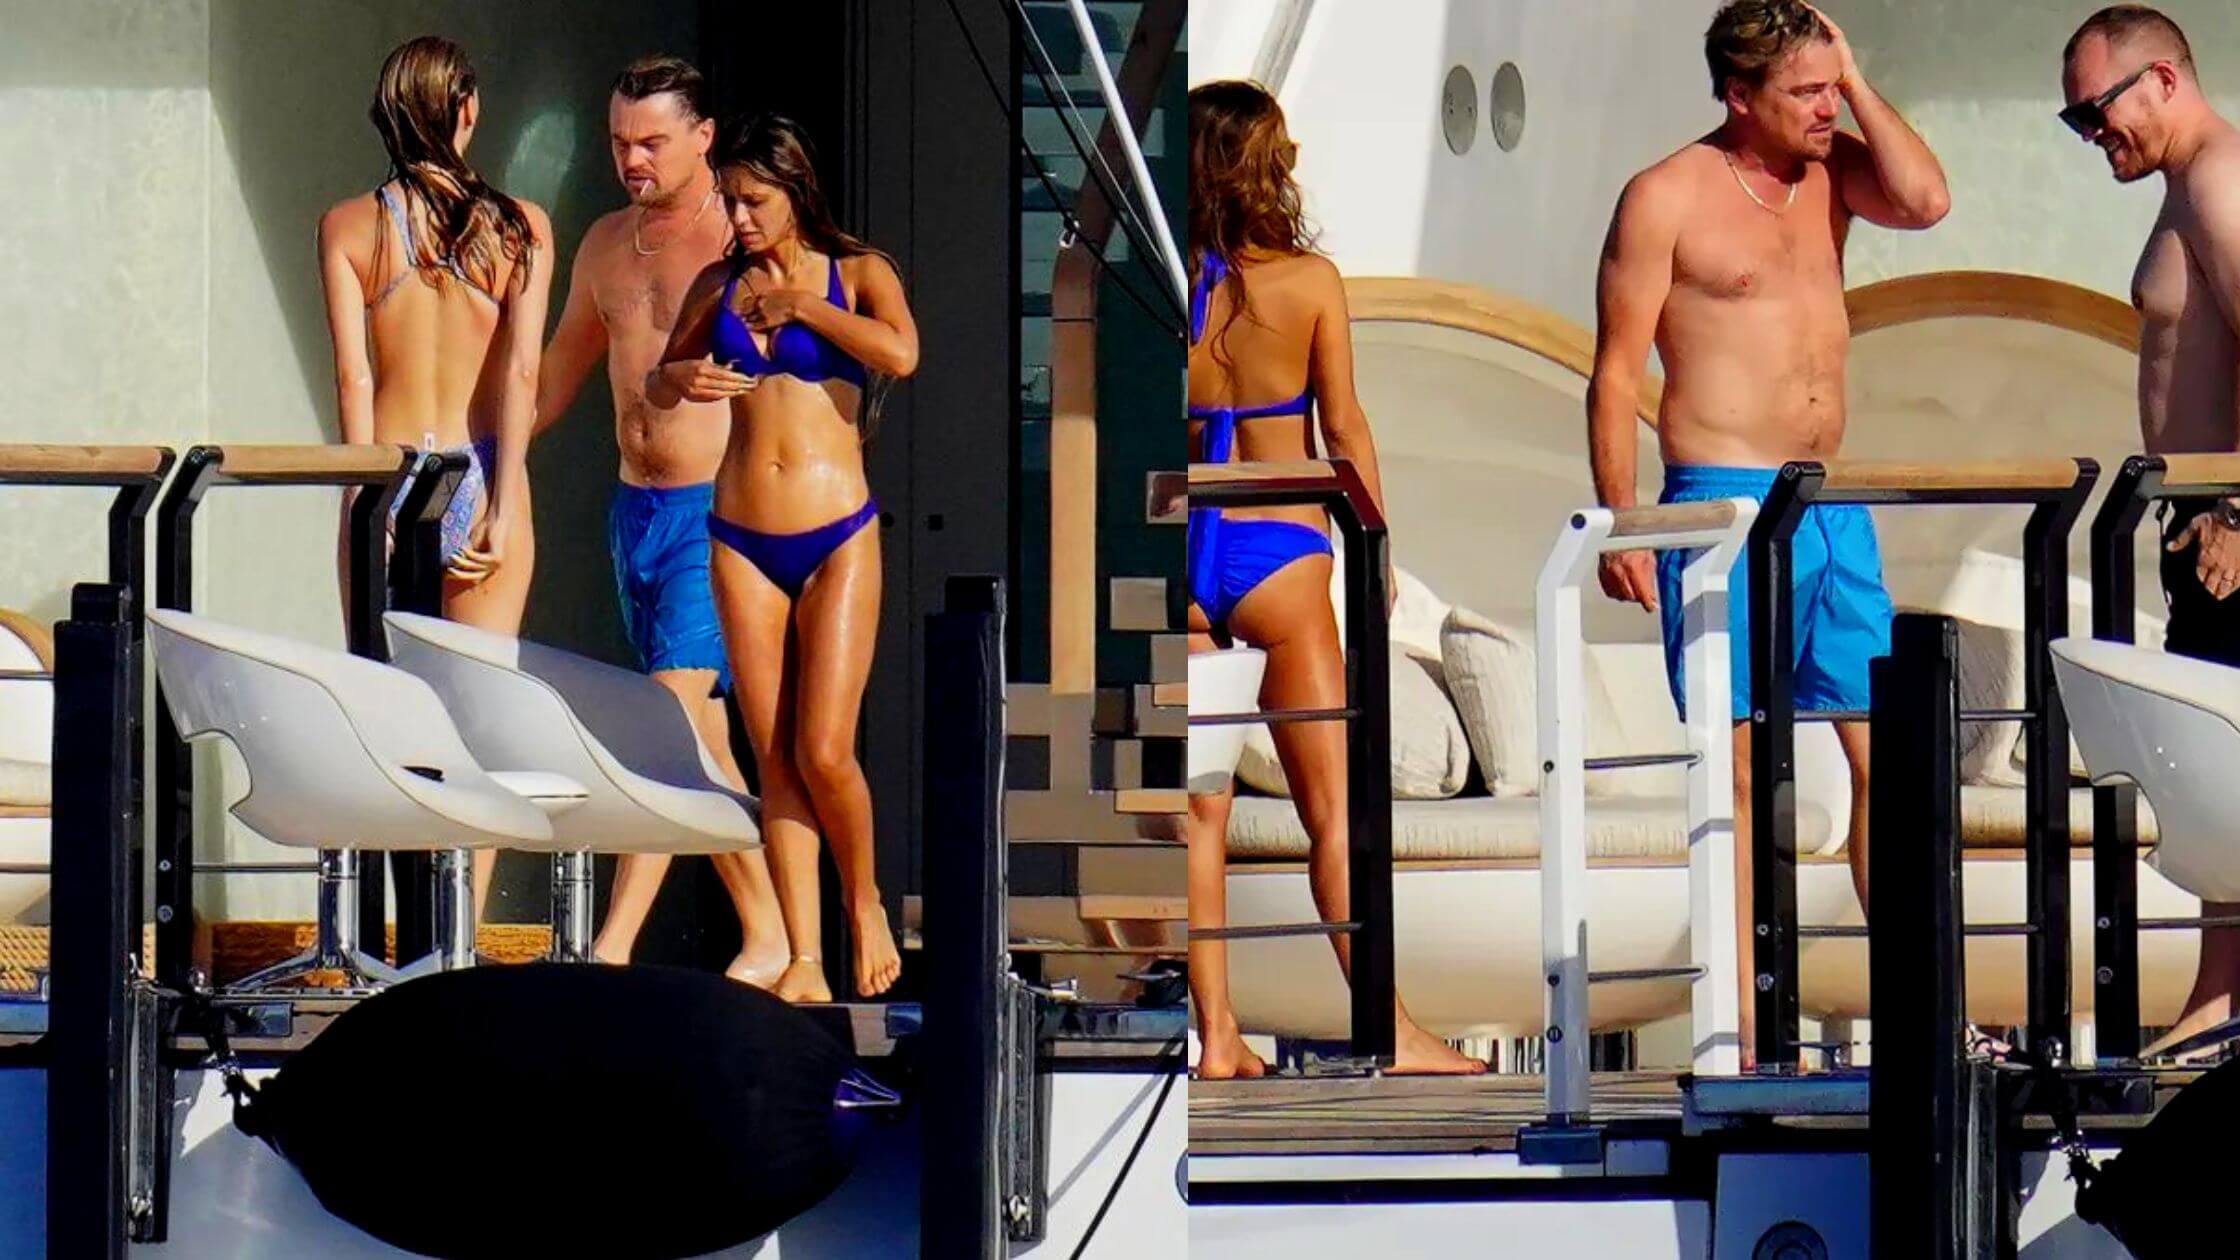 Leonardo Dicaprio Was Sighted With Multiple Bikini-Clad Ladies On A Yacht